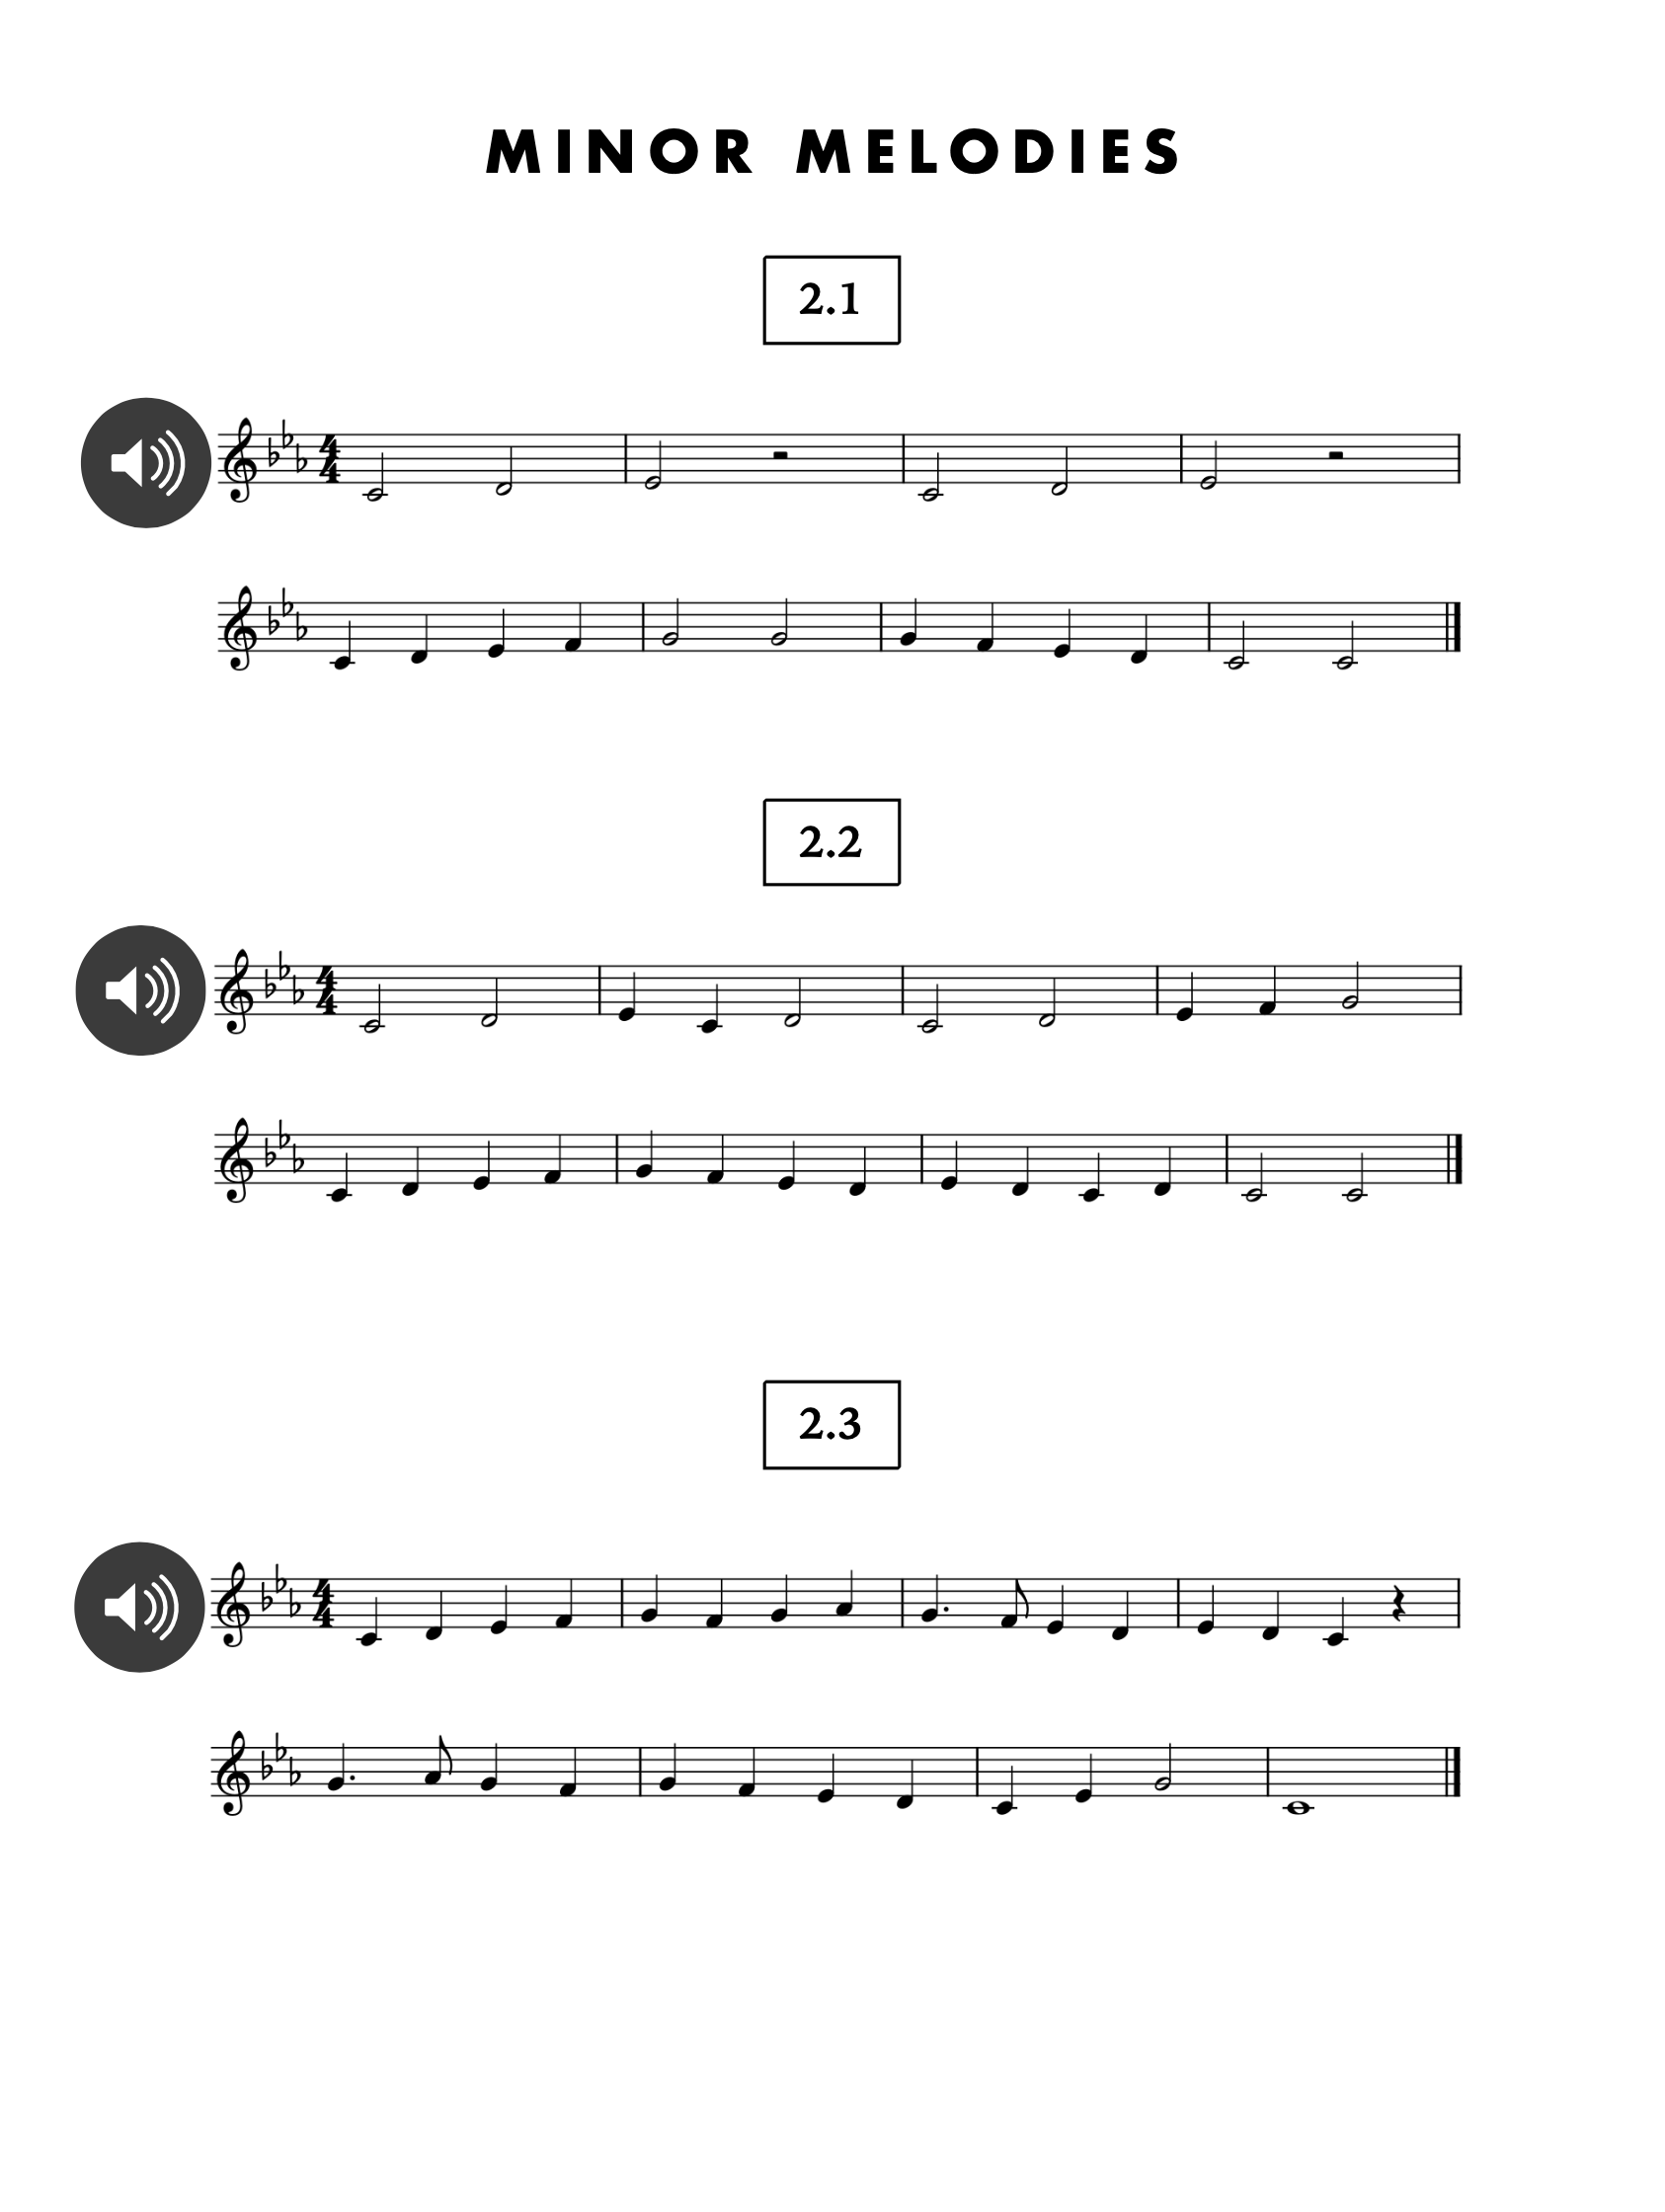 Music notation of minor melodies.